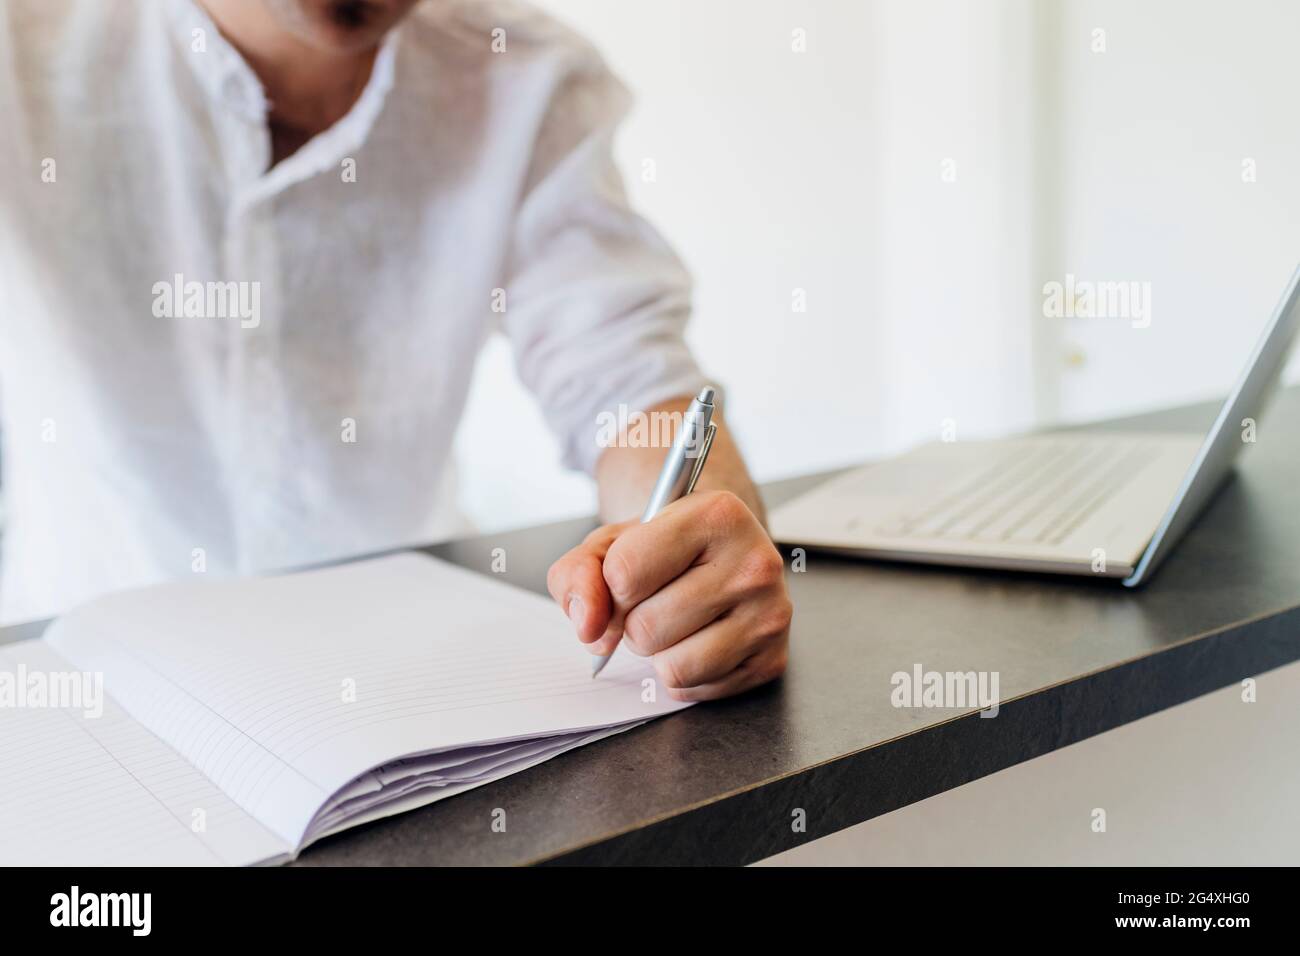 Man making list on book by laptop at kitchen island Stock Photo